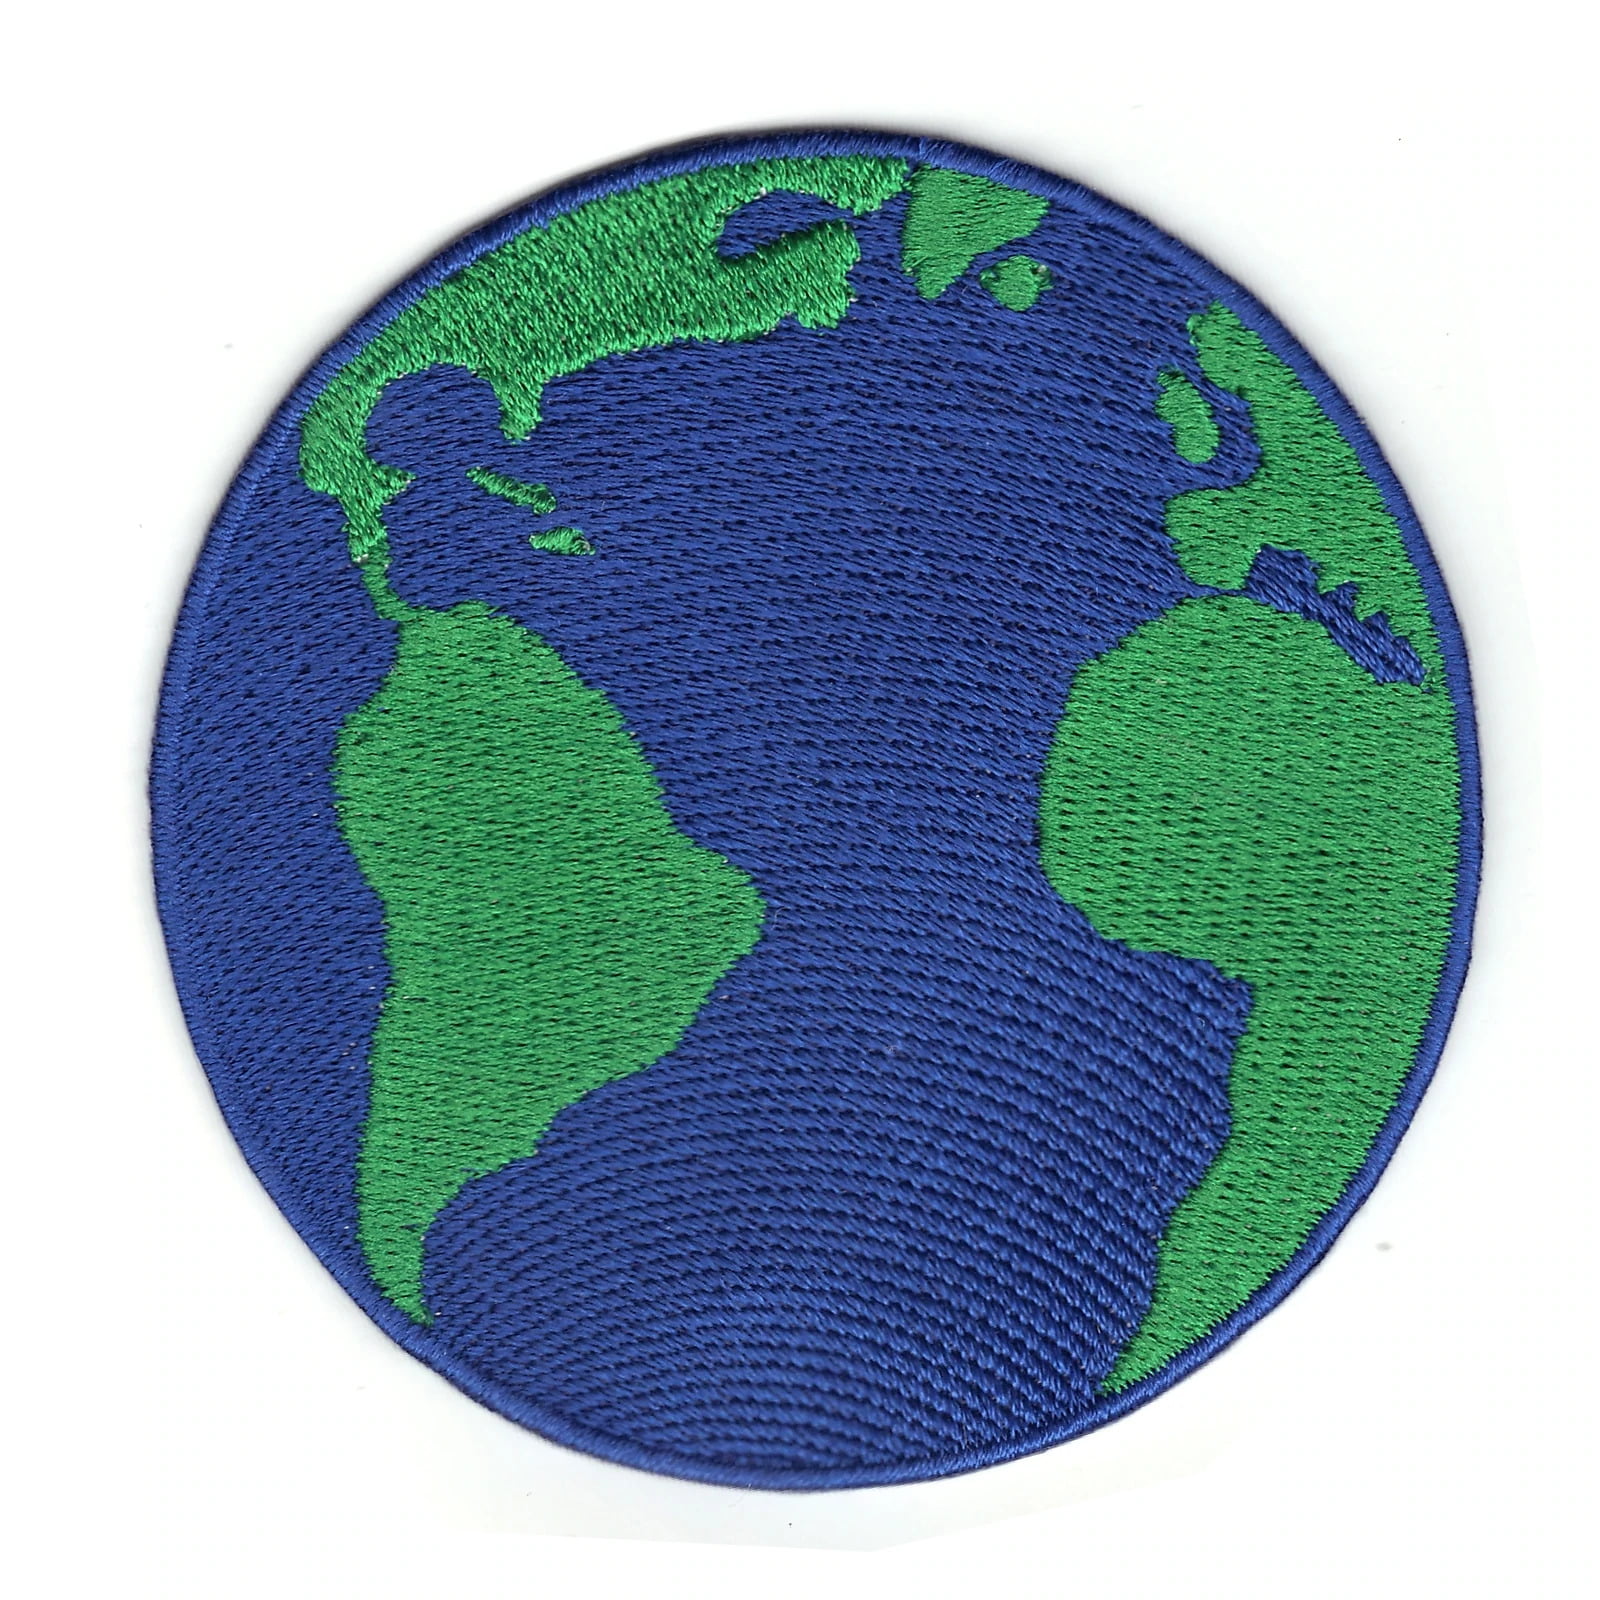 Blue Green Earth Held in Hands Ecology Embroidered Iron On Patch 2.75 Inches